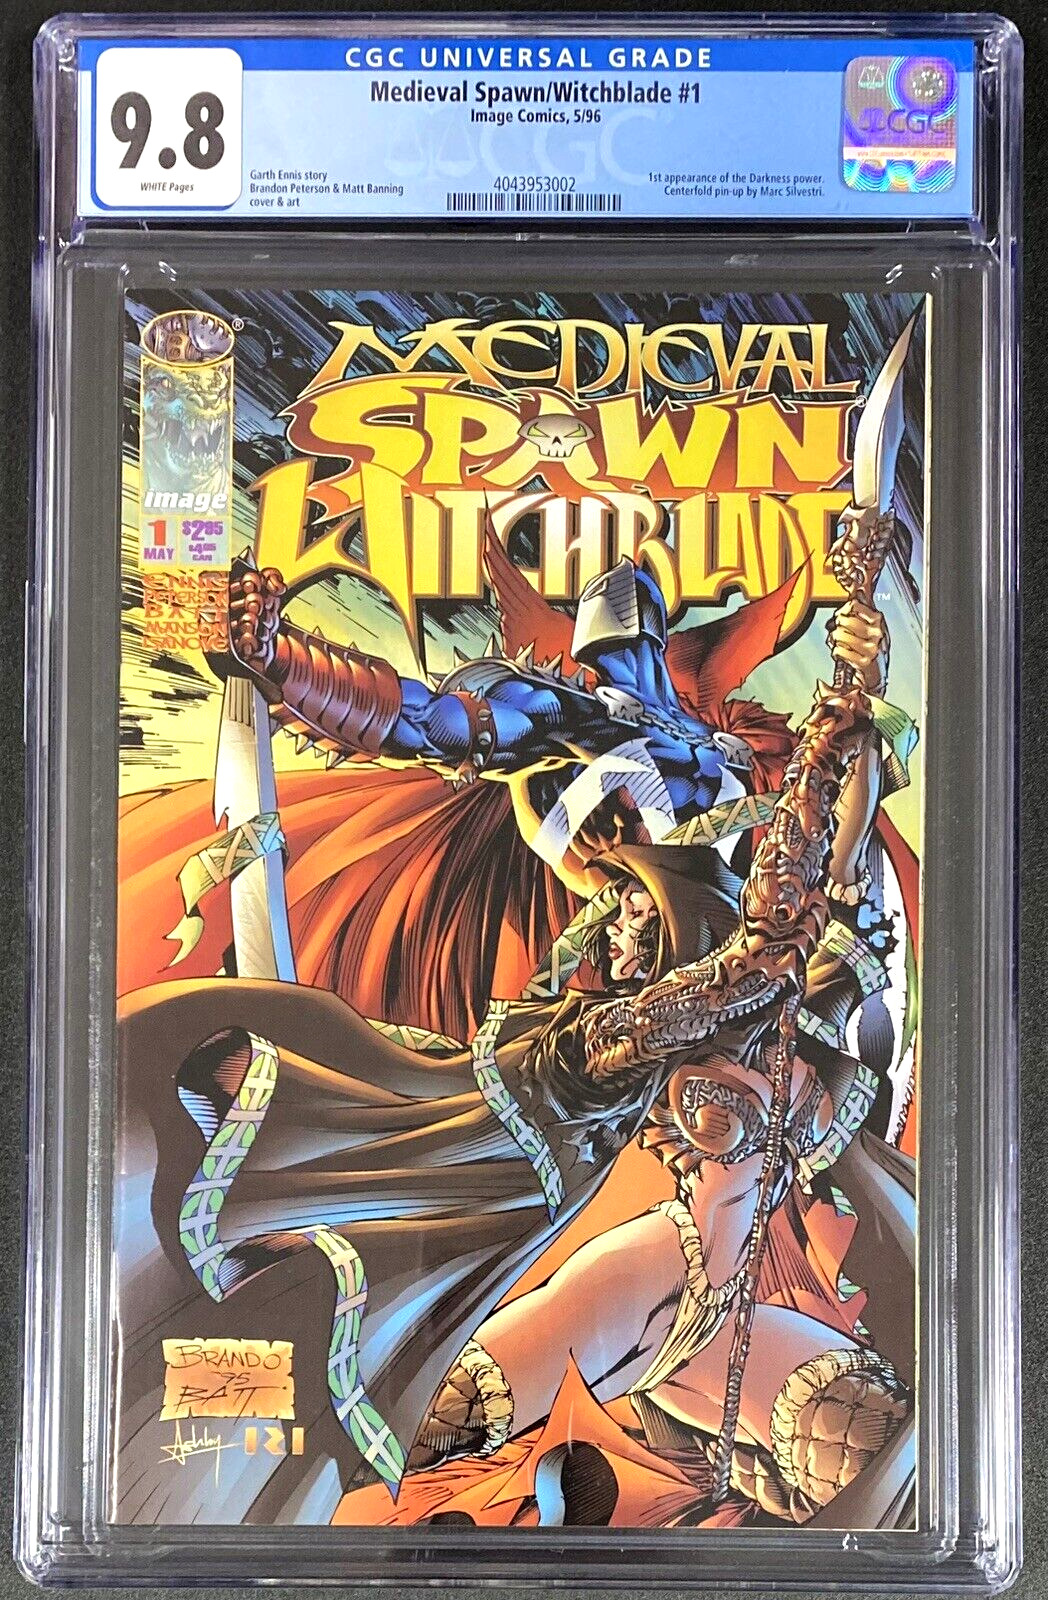 Medieval Spawn/Switchblade #1 1996 CGC 9.8 1st Darkness Marc Silvestri Pin-up